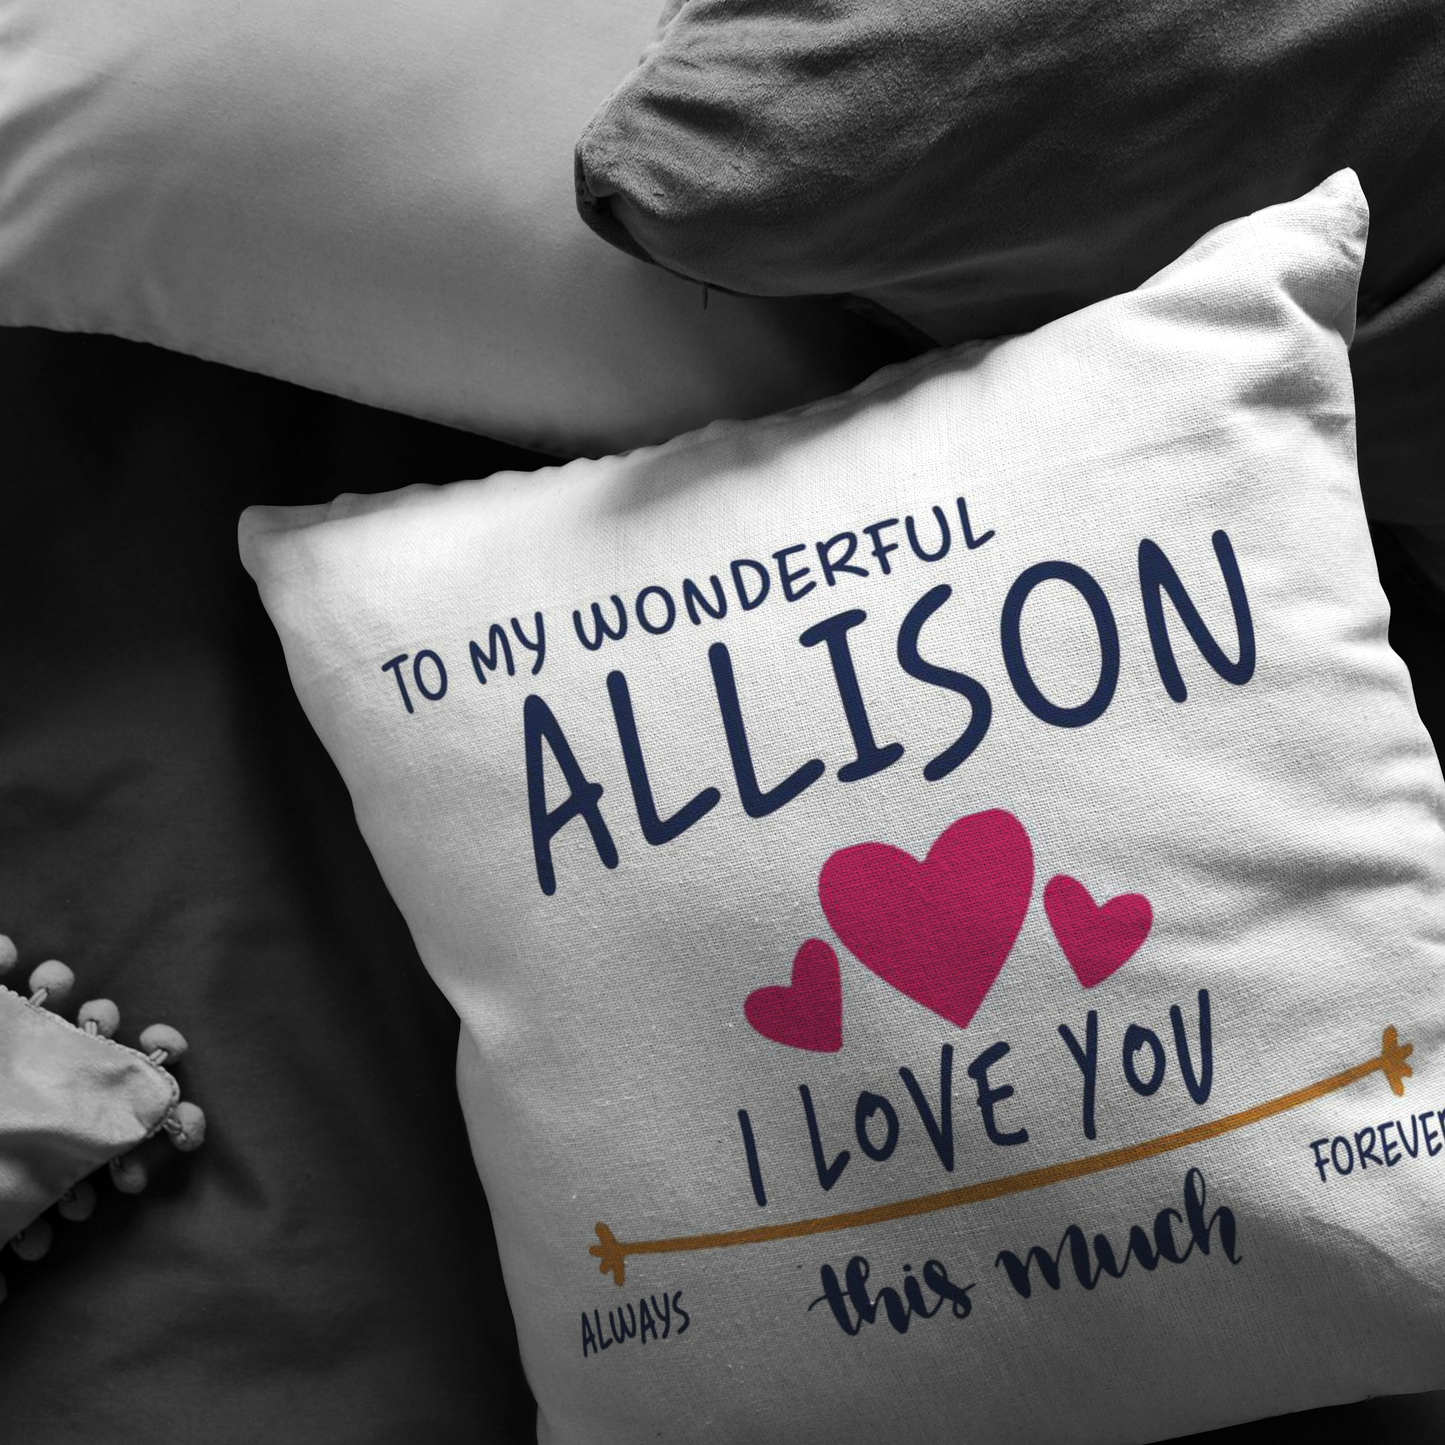 PL-21250831-sp-40563 - [ Allison | 1 | 1 ] (PI_ThrowPillowCovers) Valentines Day Pillow Covers 18x18 - to My Wonderful Allison